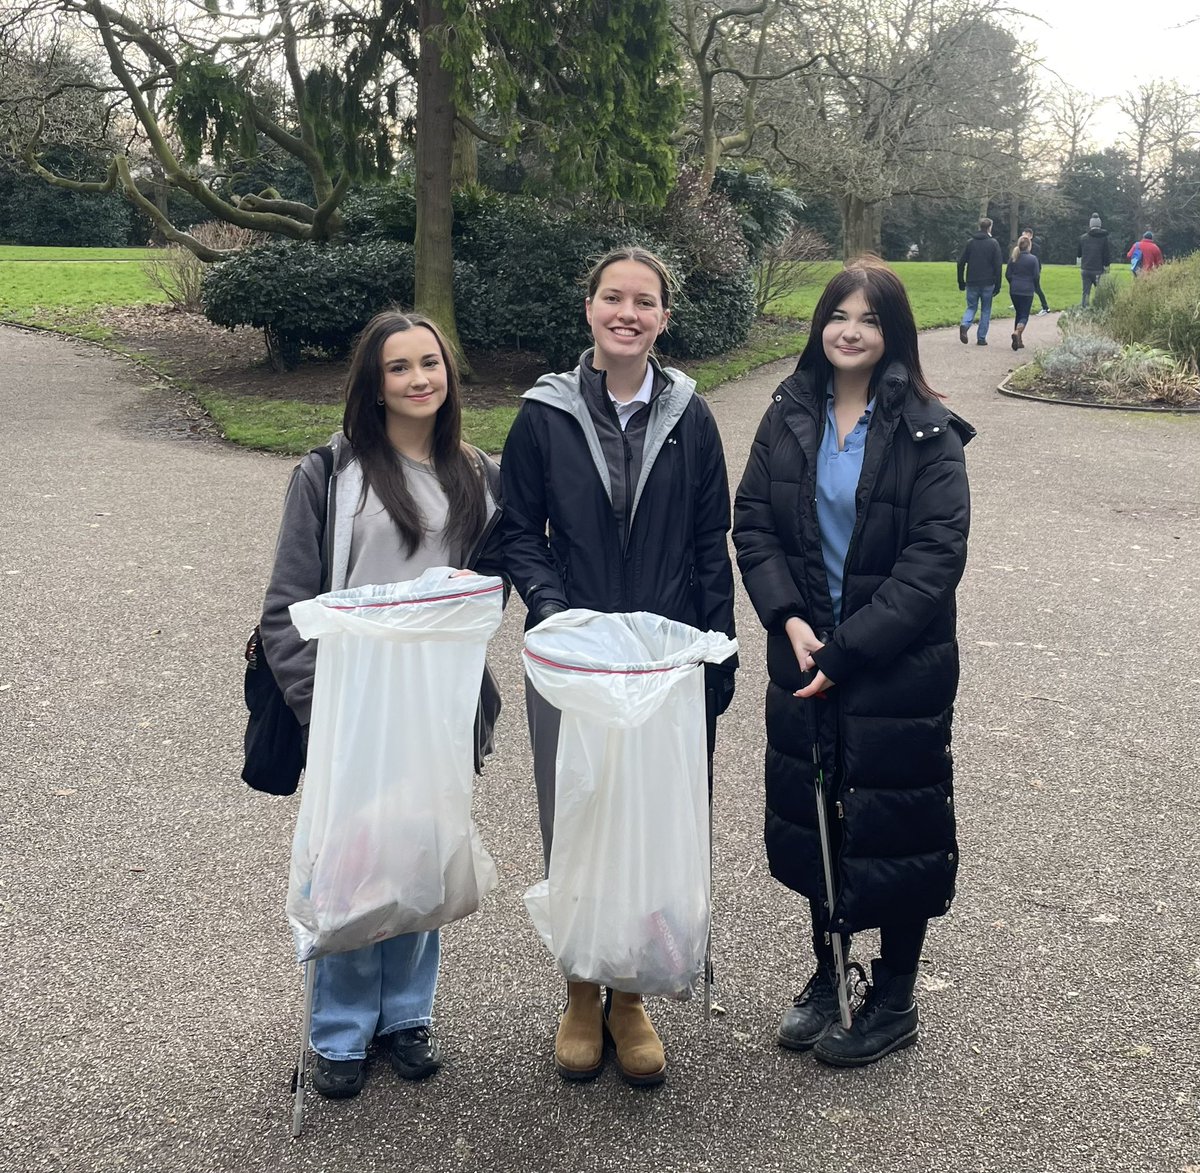 Team Westminster Park out with @daisycoopmp doing a litter pick for @EcoCommunities_ Chester! Well & truly making a difference within the local community 🚮 @ianhall_92588 @jeanie_hughes